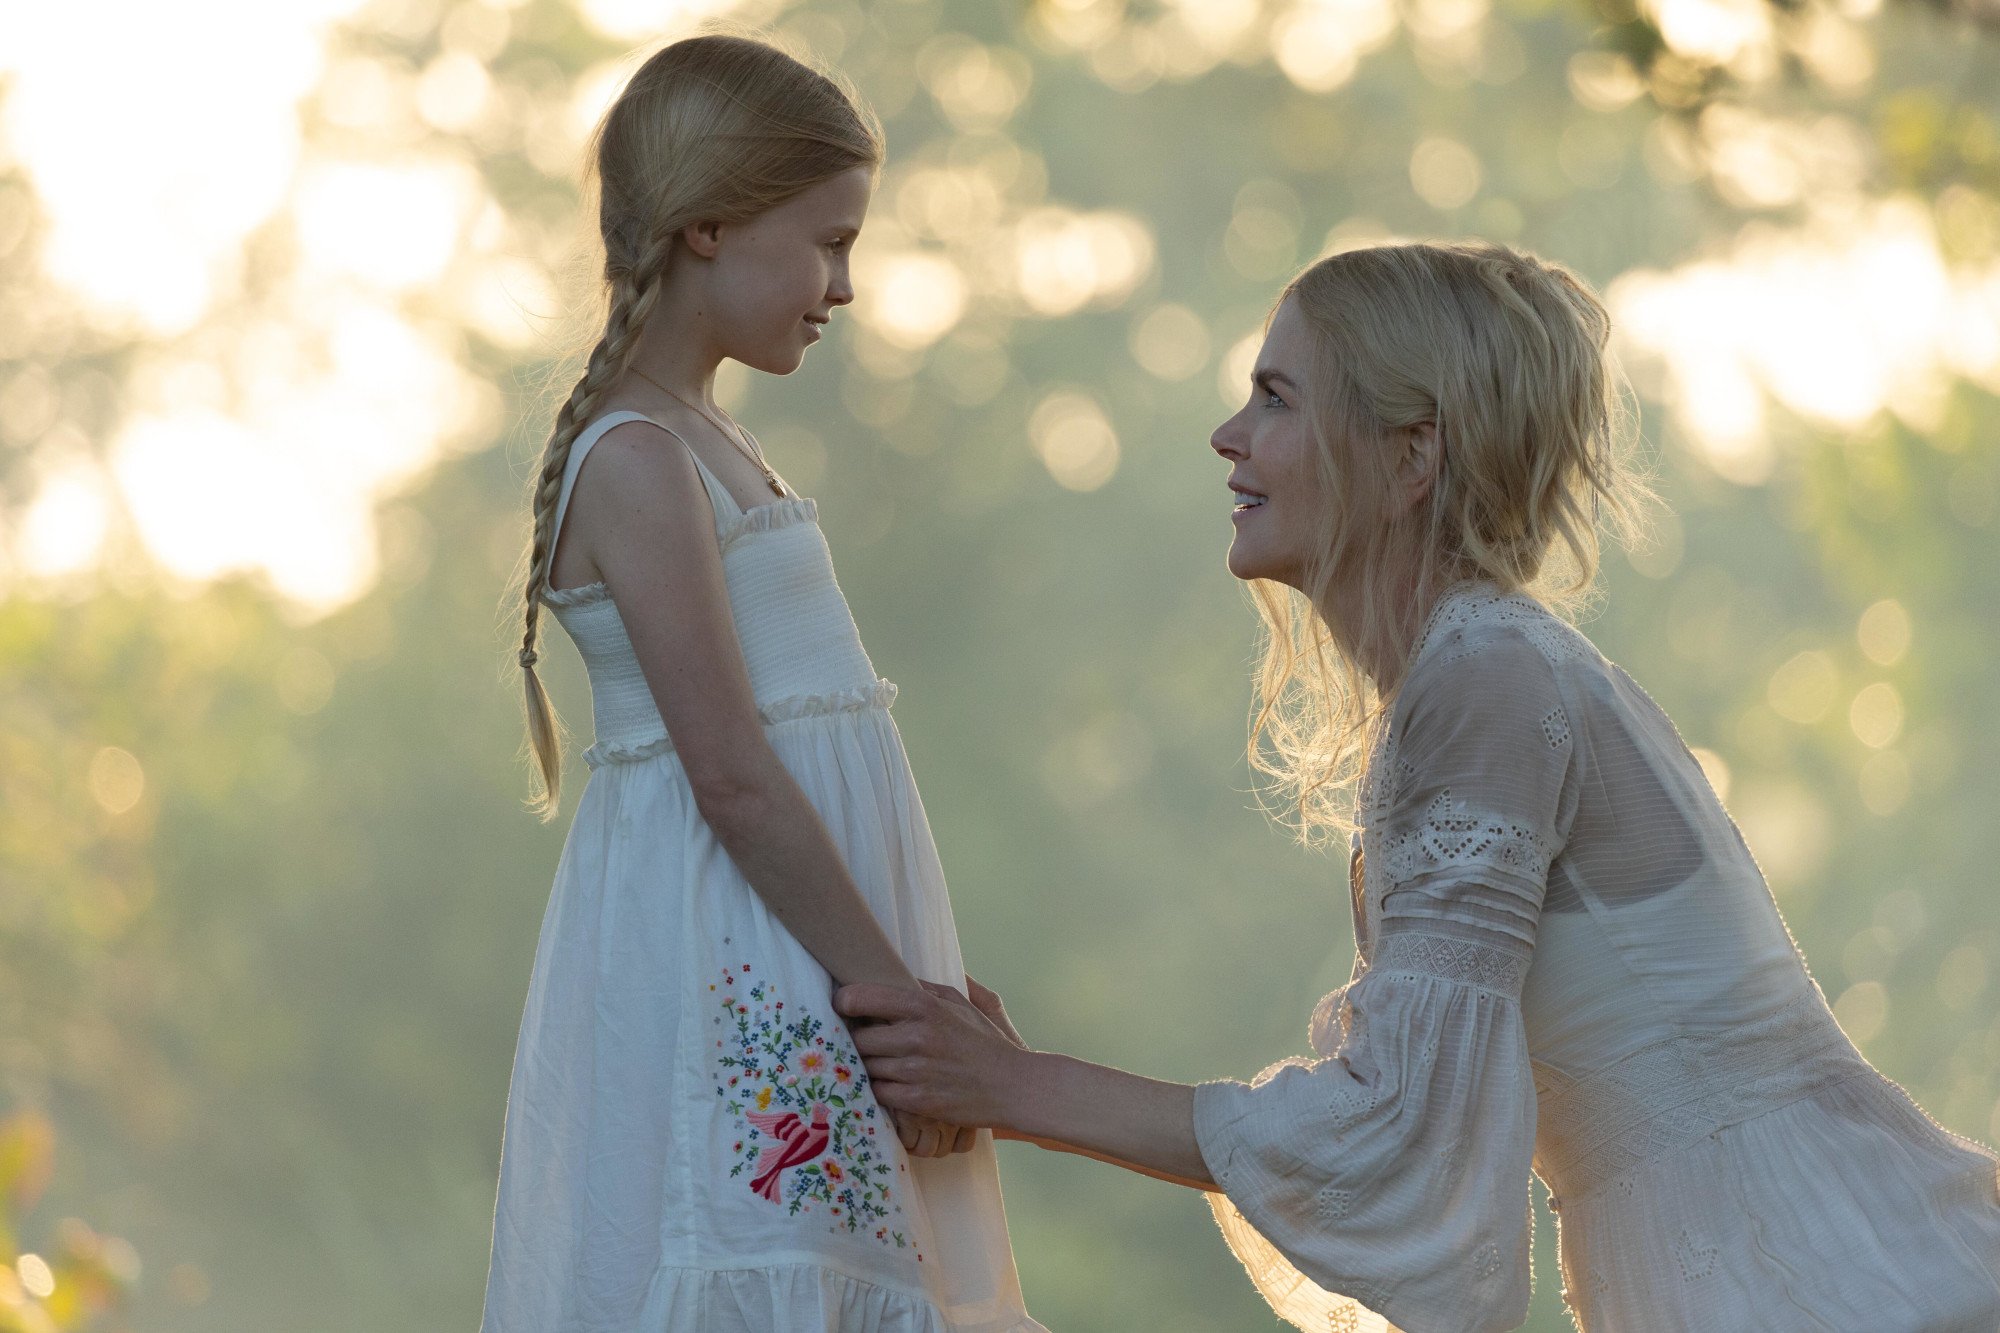 Masha (Nicole Kidman) reunites with her young daughter in the 'Nine Perfect Strangers' finale. She kneels in front of the young, blonde girl and there are trees and sunlight behind them.